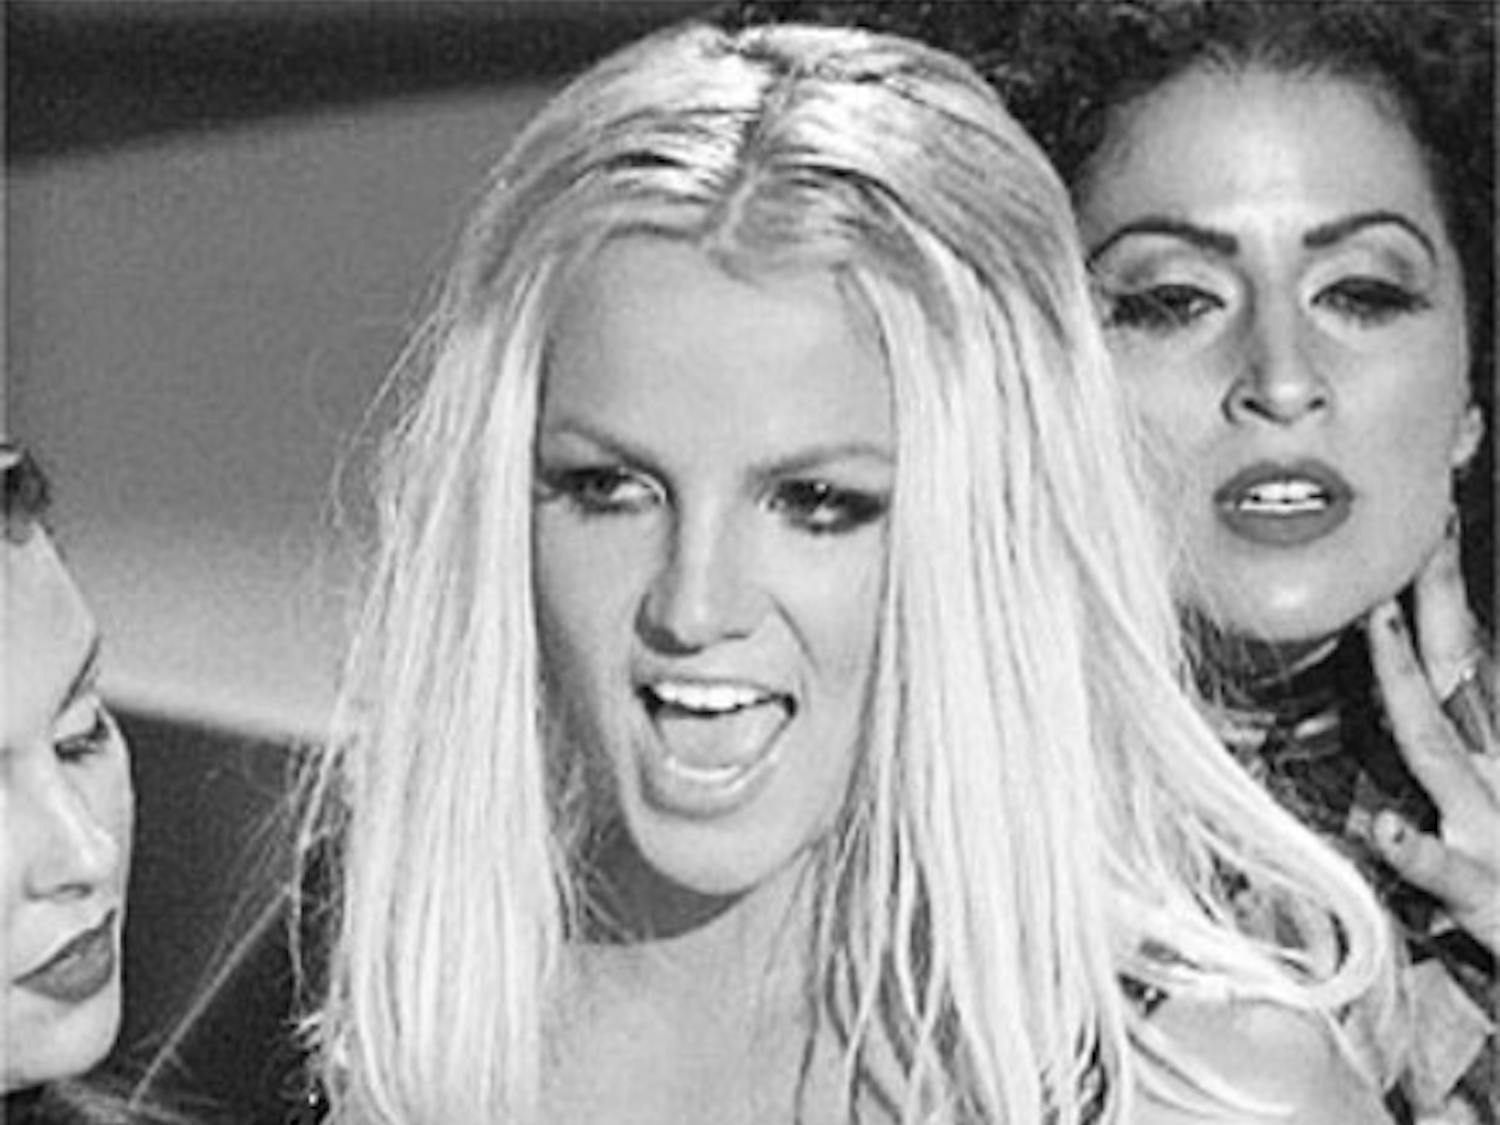 Britney's bumbling VMA performance in September brought her back to the forefront of the music scene; unlike her stage presence, her album is great.